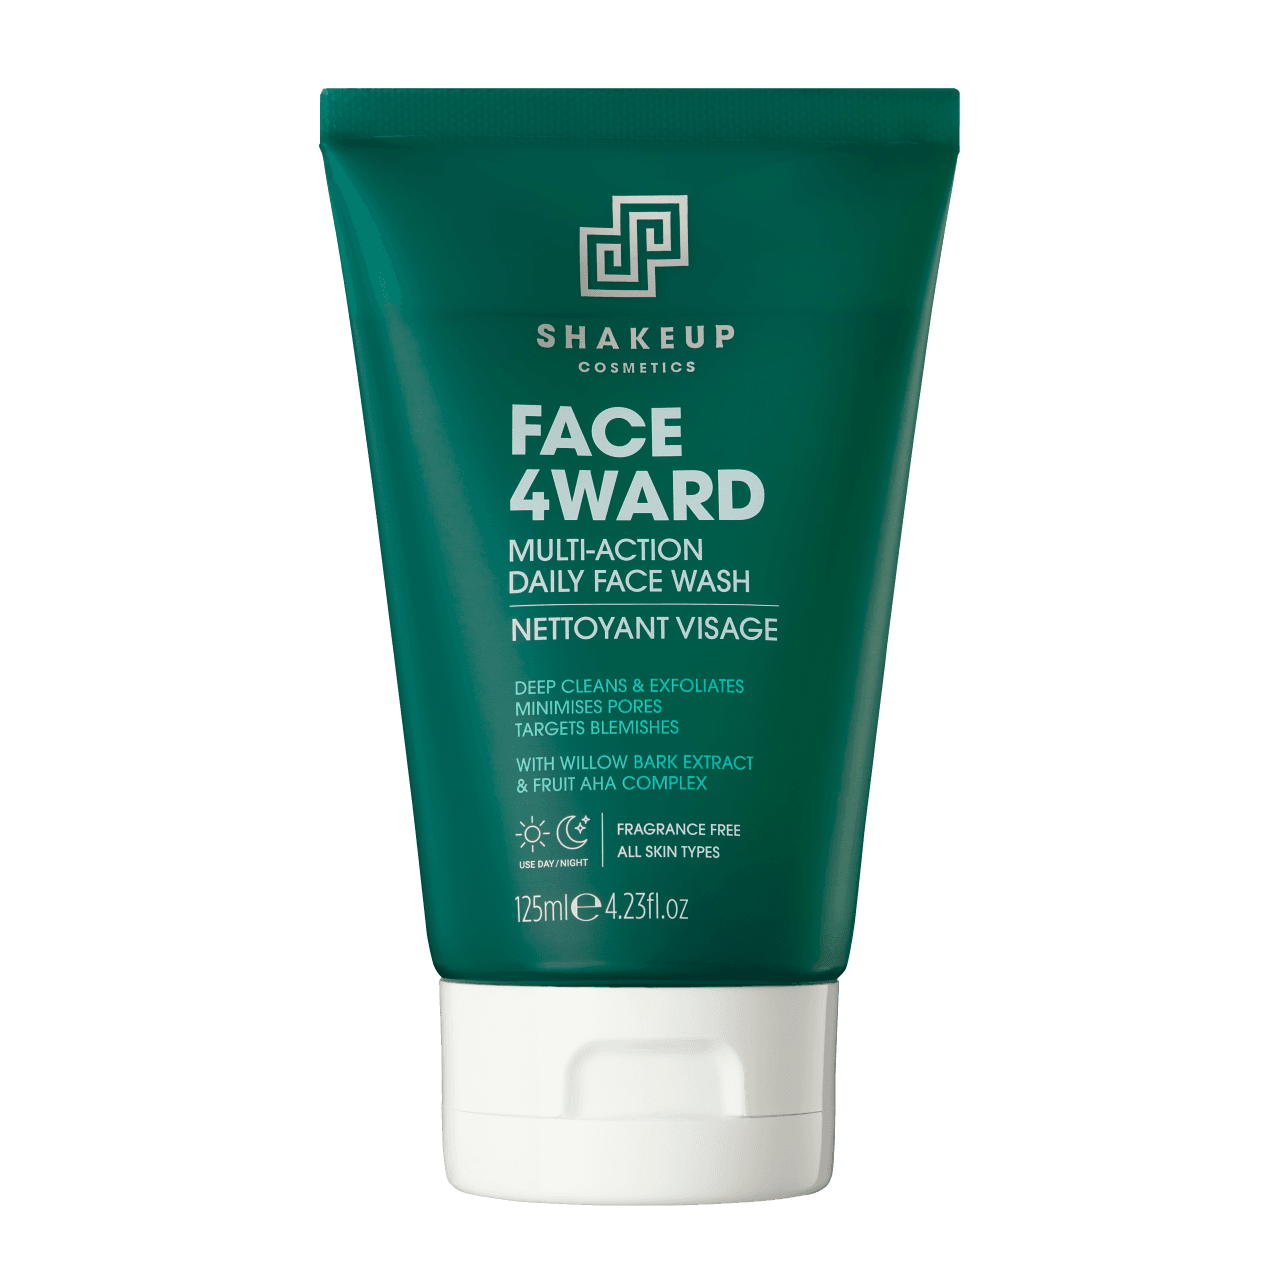 Face 4ward - Multi-Action Daily Face Wash